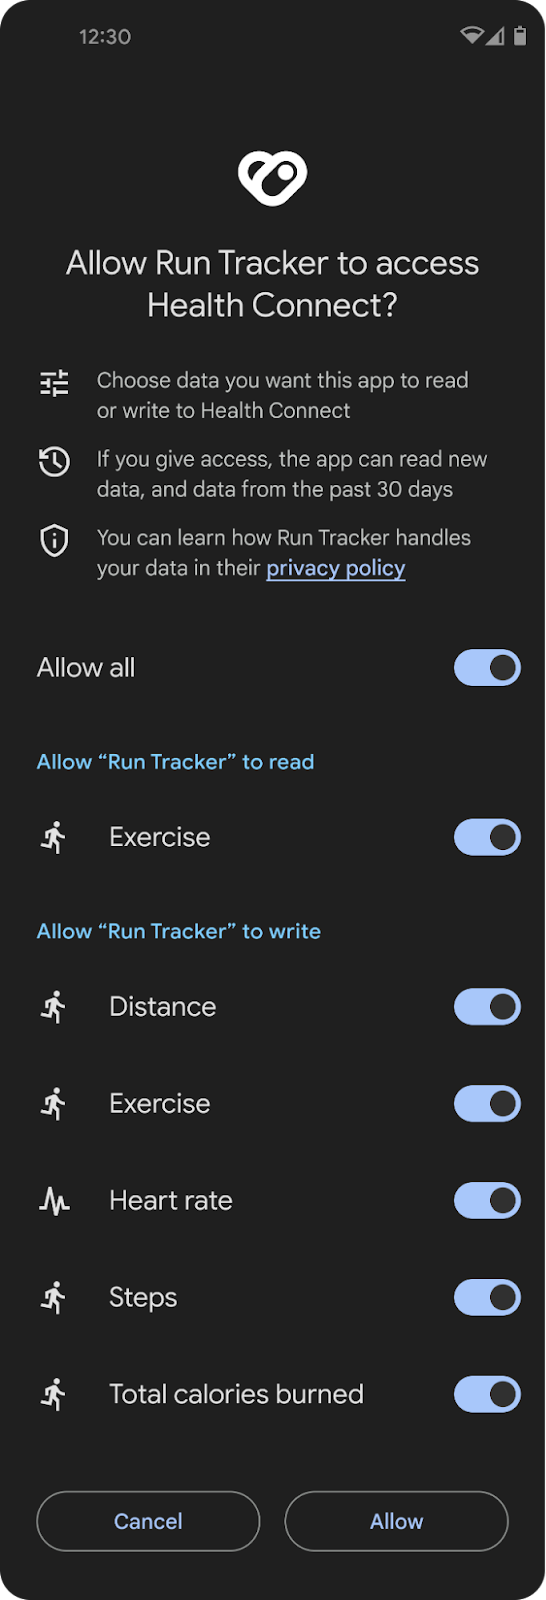 Phone screen showing granular permissions for Run Tracker app to access in Health Connect